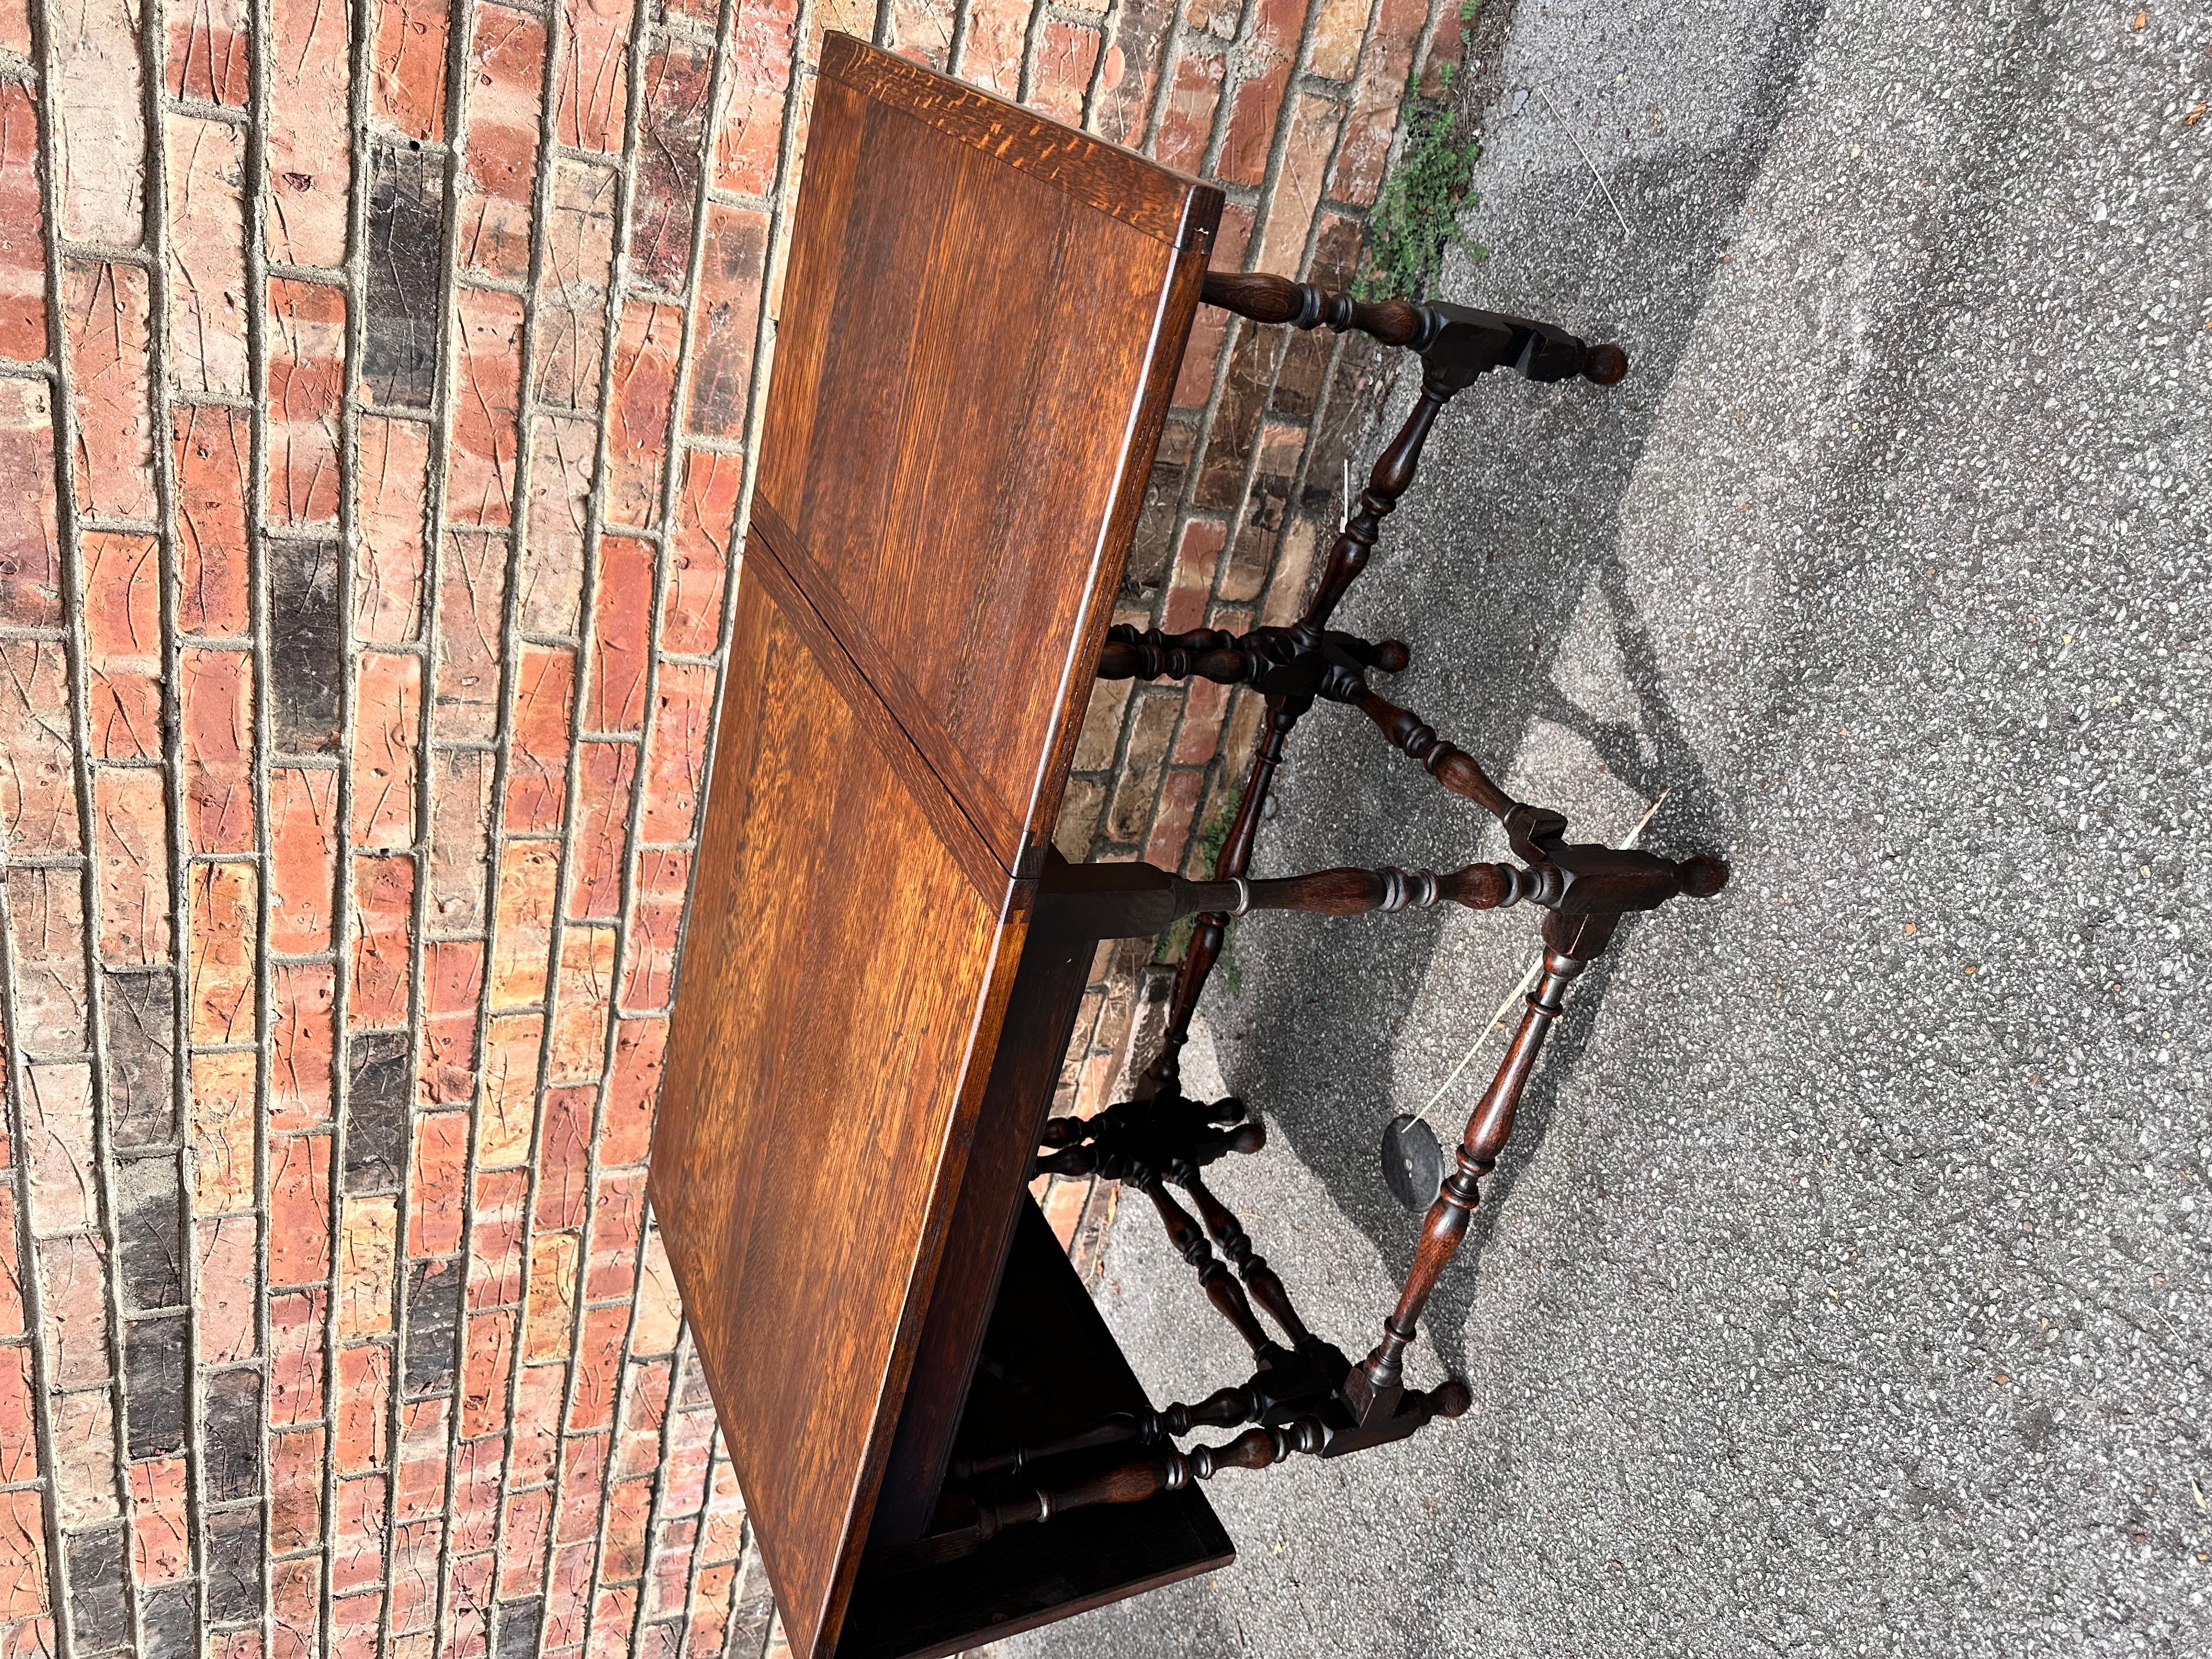 This is a beautiful antique table! Dating to 19th century England, this piece has beautiful character and patina. There is gorgeous variation in the dark toned wood, with natural detail in the grain of the top. The legs are turned, which adds some